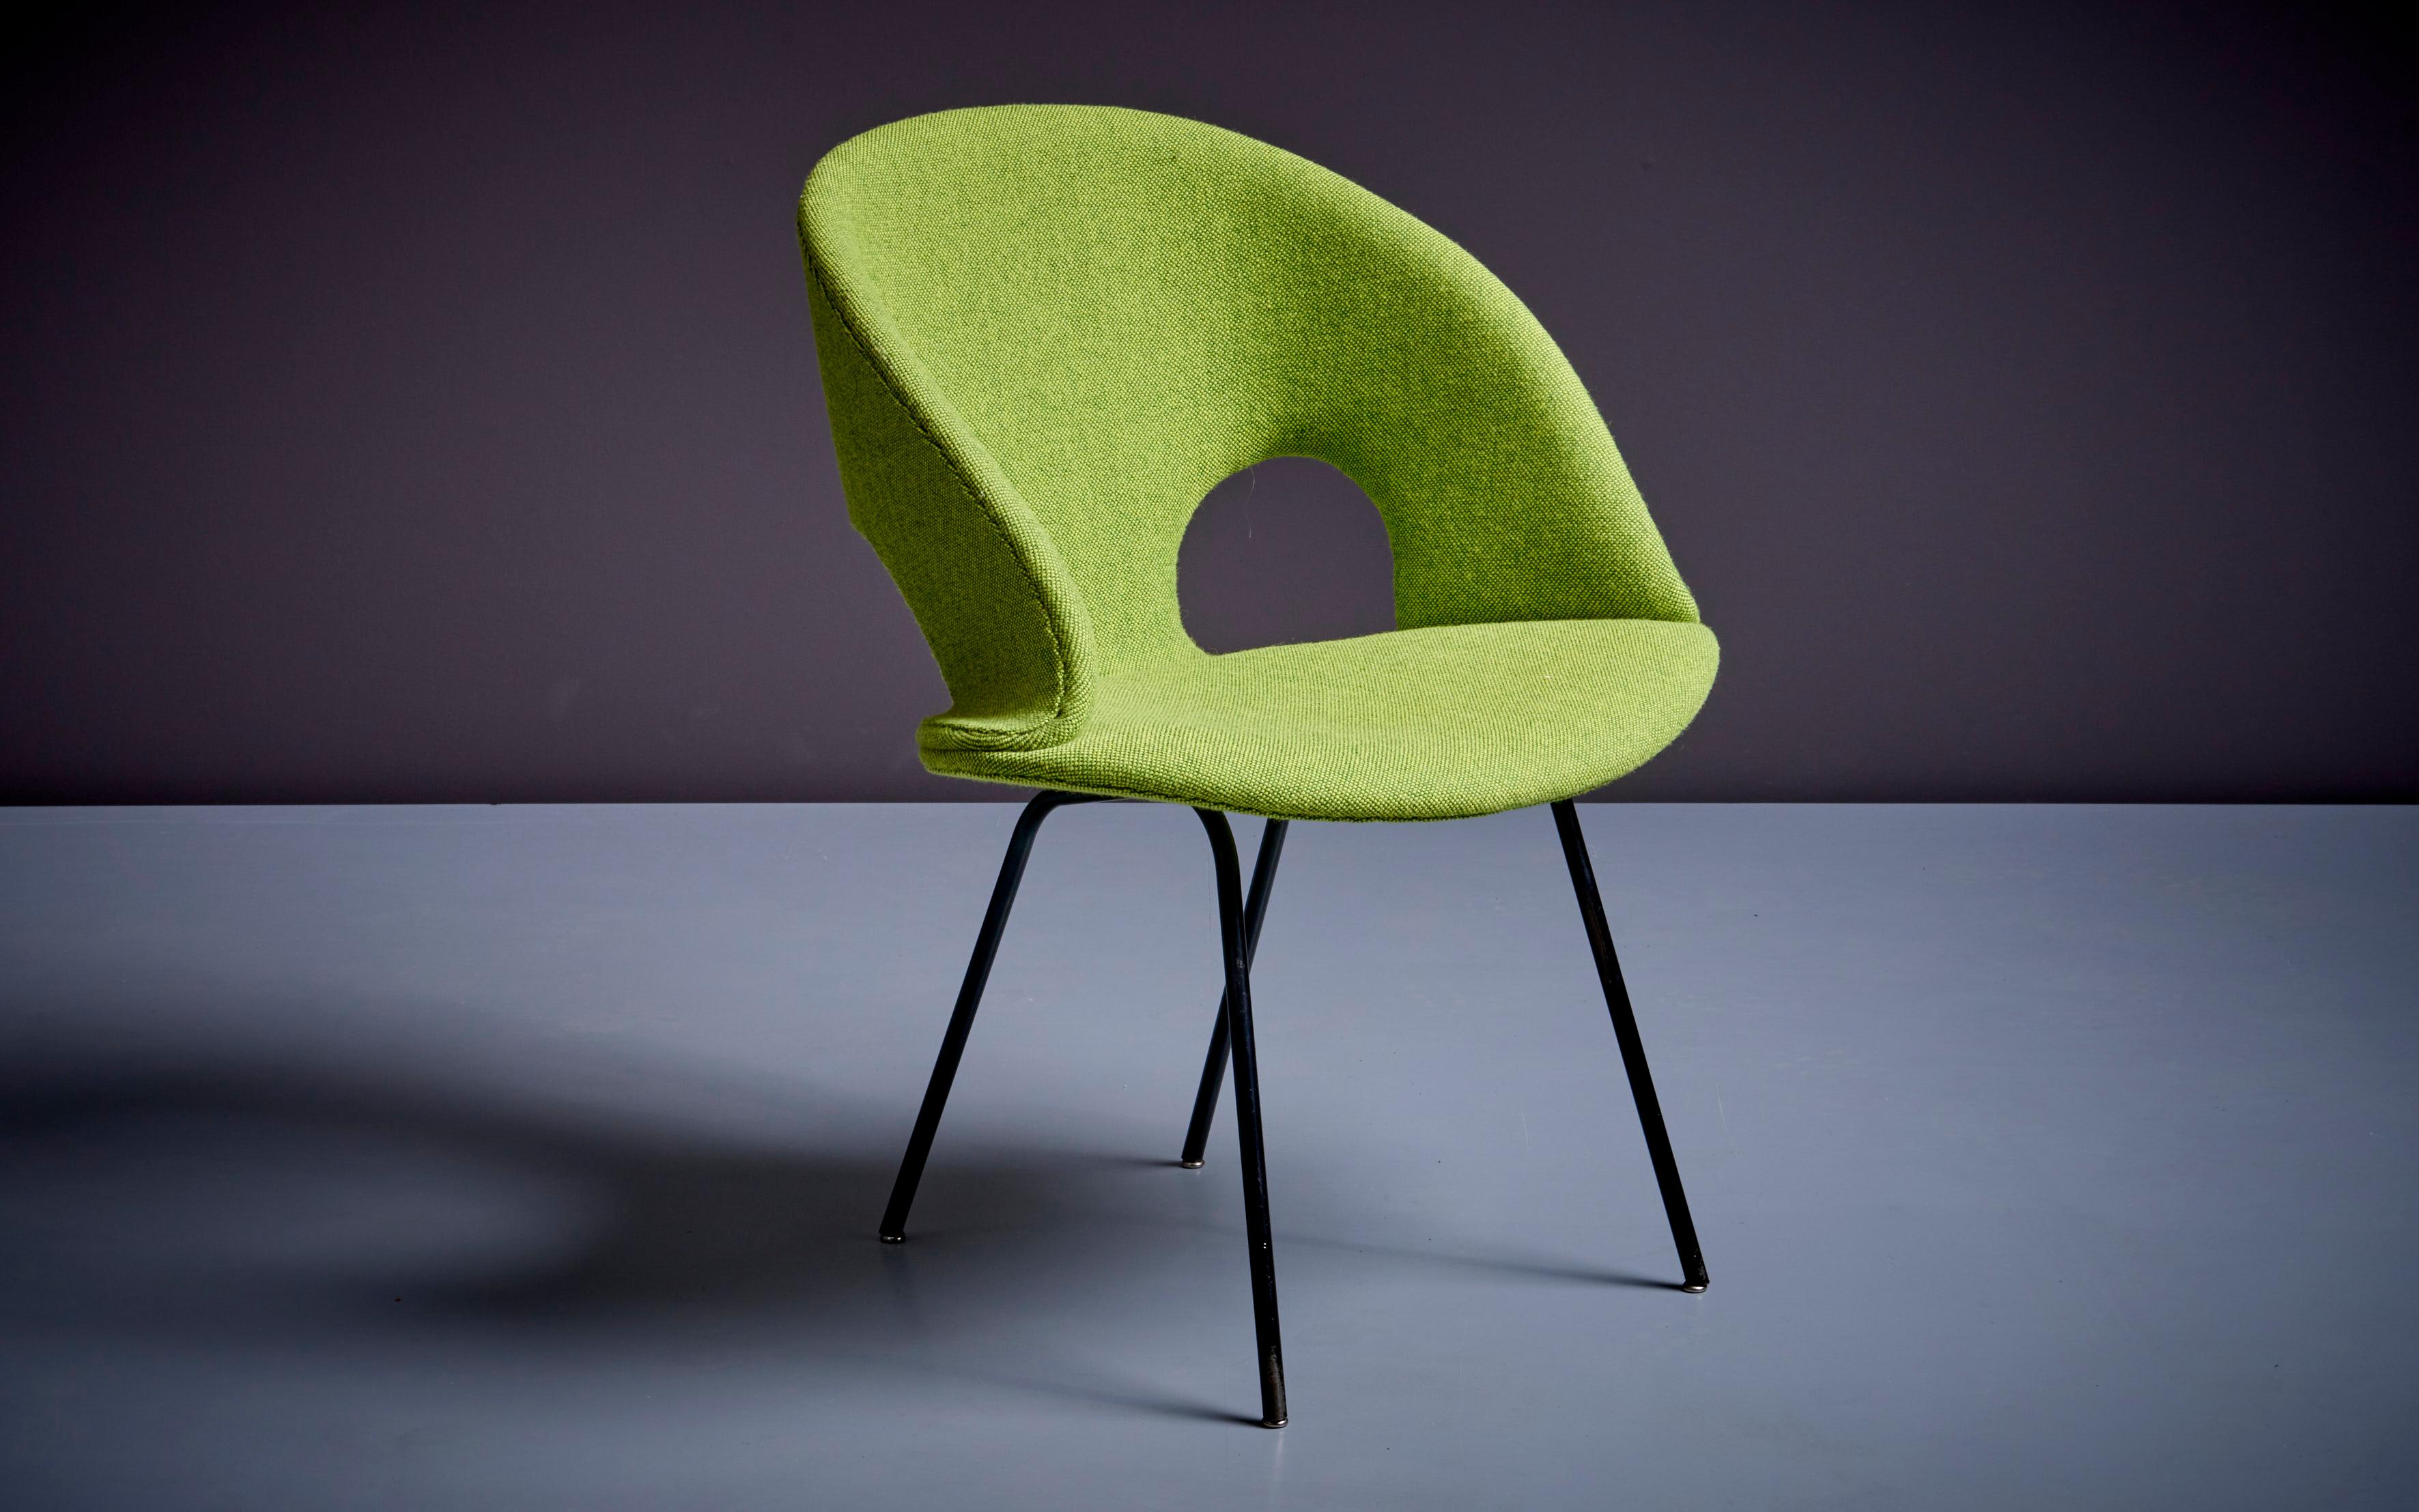 Newly upholstered model 350 lounge chair by Arno Votteler Walter Knoll
Rare Arno Votteler chair model 350 for Walter Knoll. Newly upholstered in Kvadrat Hallingdal Fabric.

Arno Votteler was a German industrial designer, architect, and teacher who